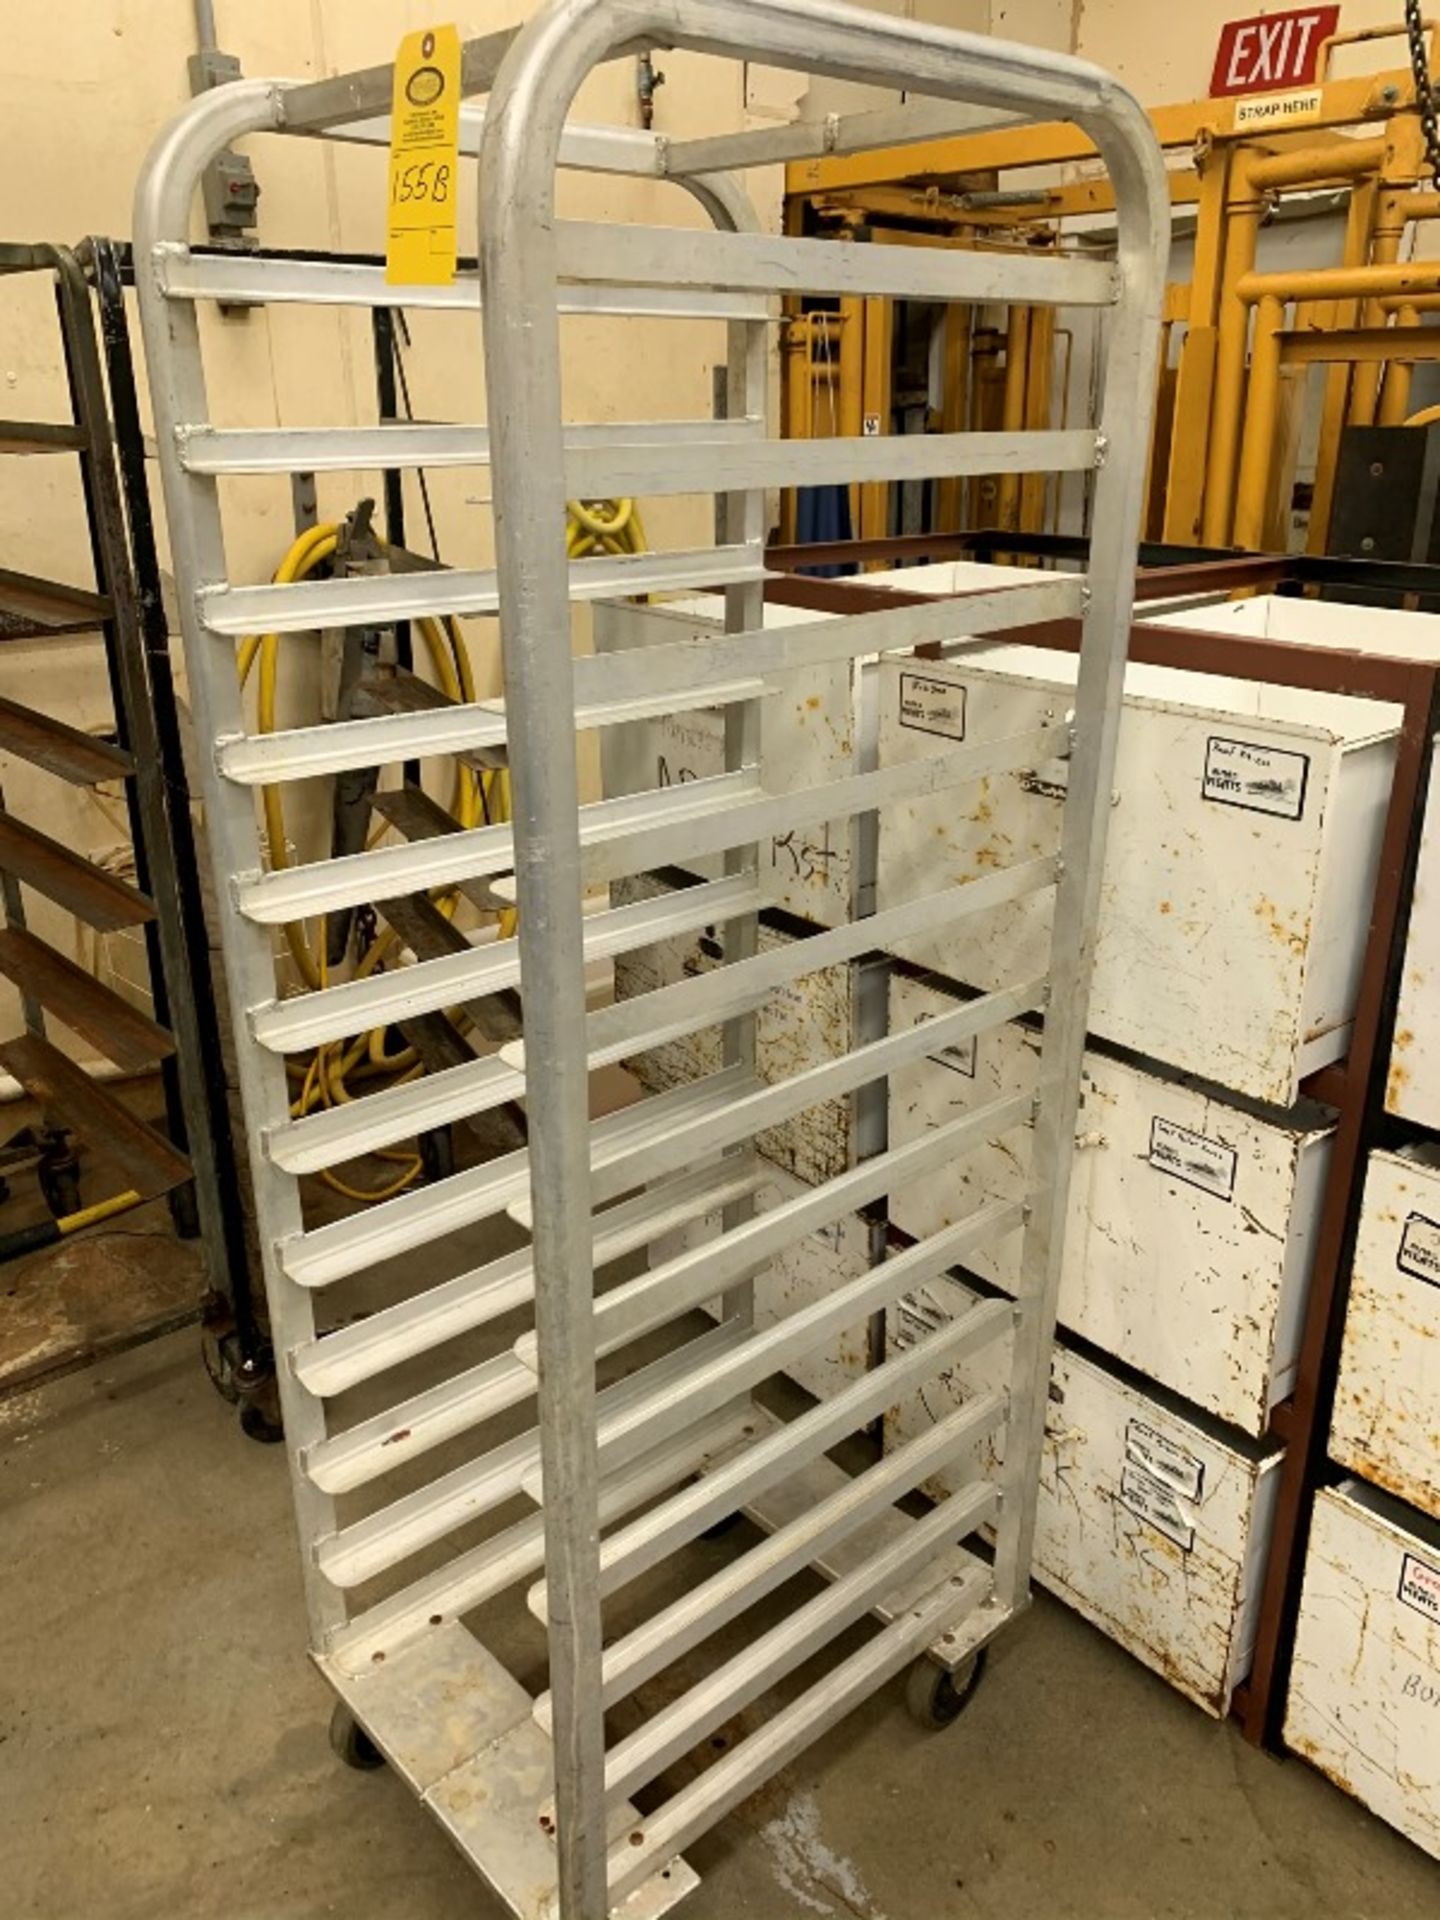 Aluminum Freezer Carts 6' Tall will hold 12 freezer baskets(All Funds Must Be Received by Friday, - Image 3 of 3